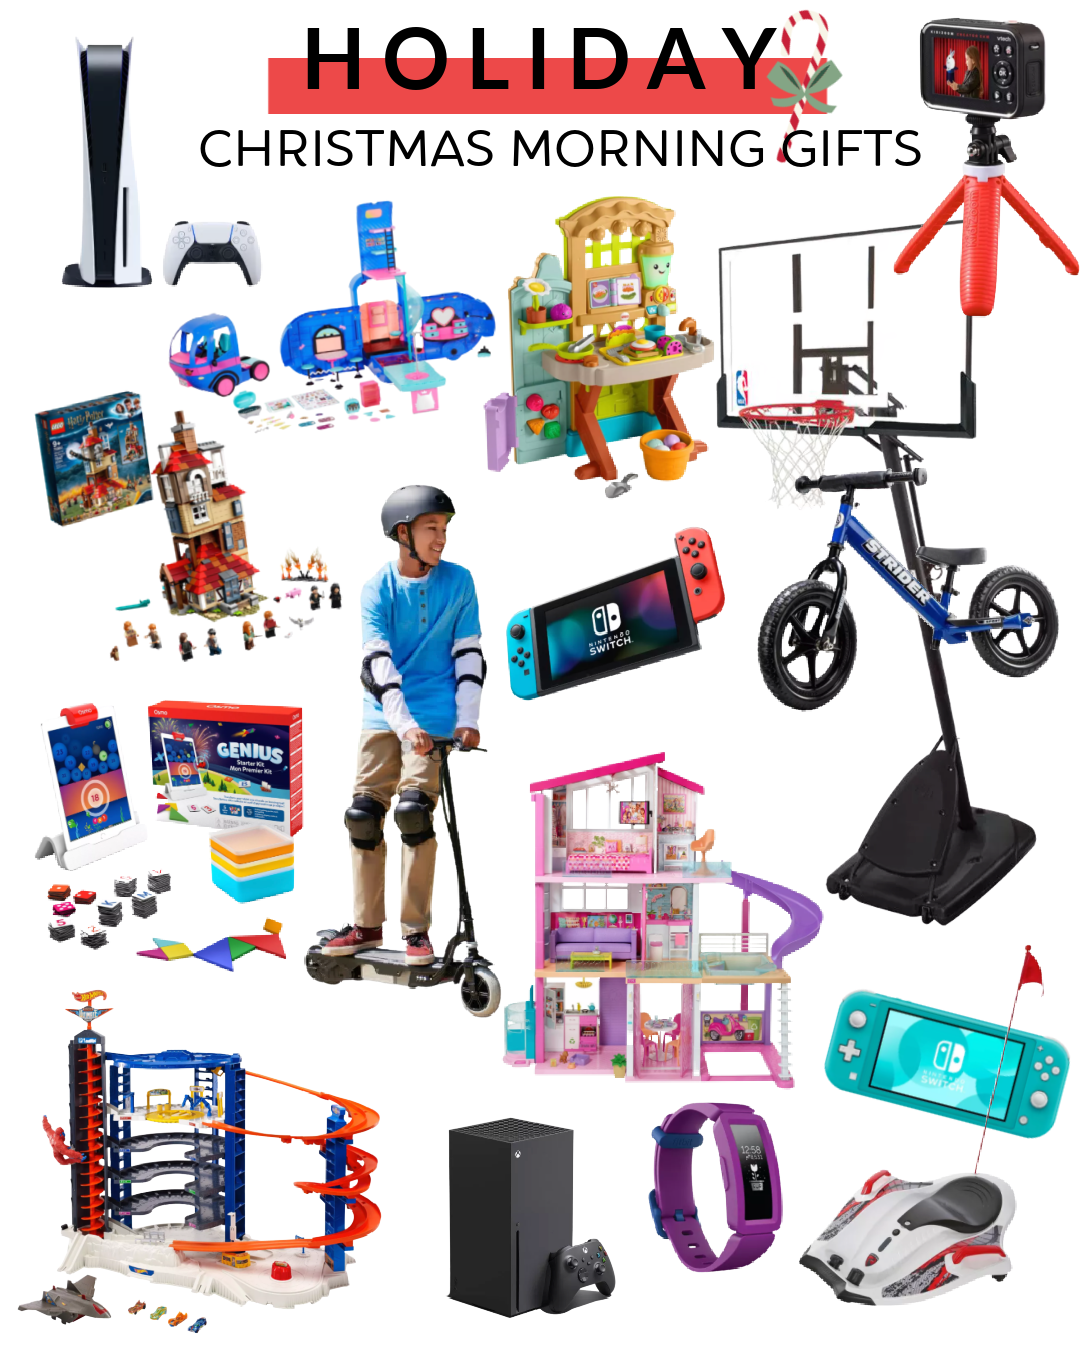 https://the-sister-studio.com/wp-content/uploads/2020/11/Christmas-Morning-Gift-Guide.png